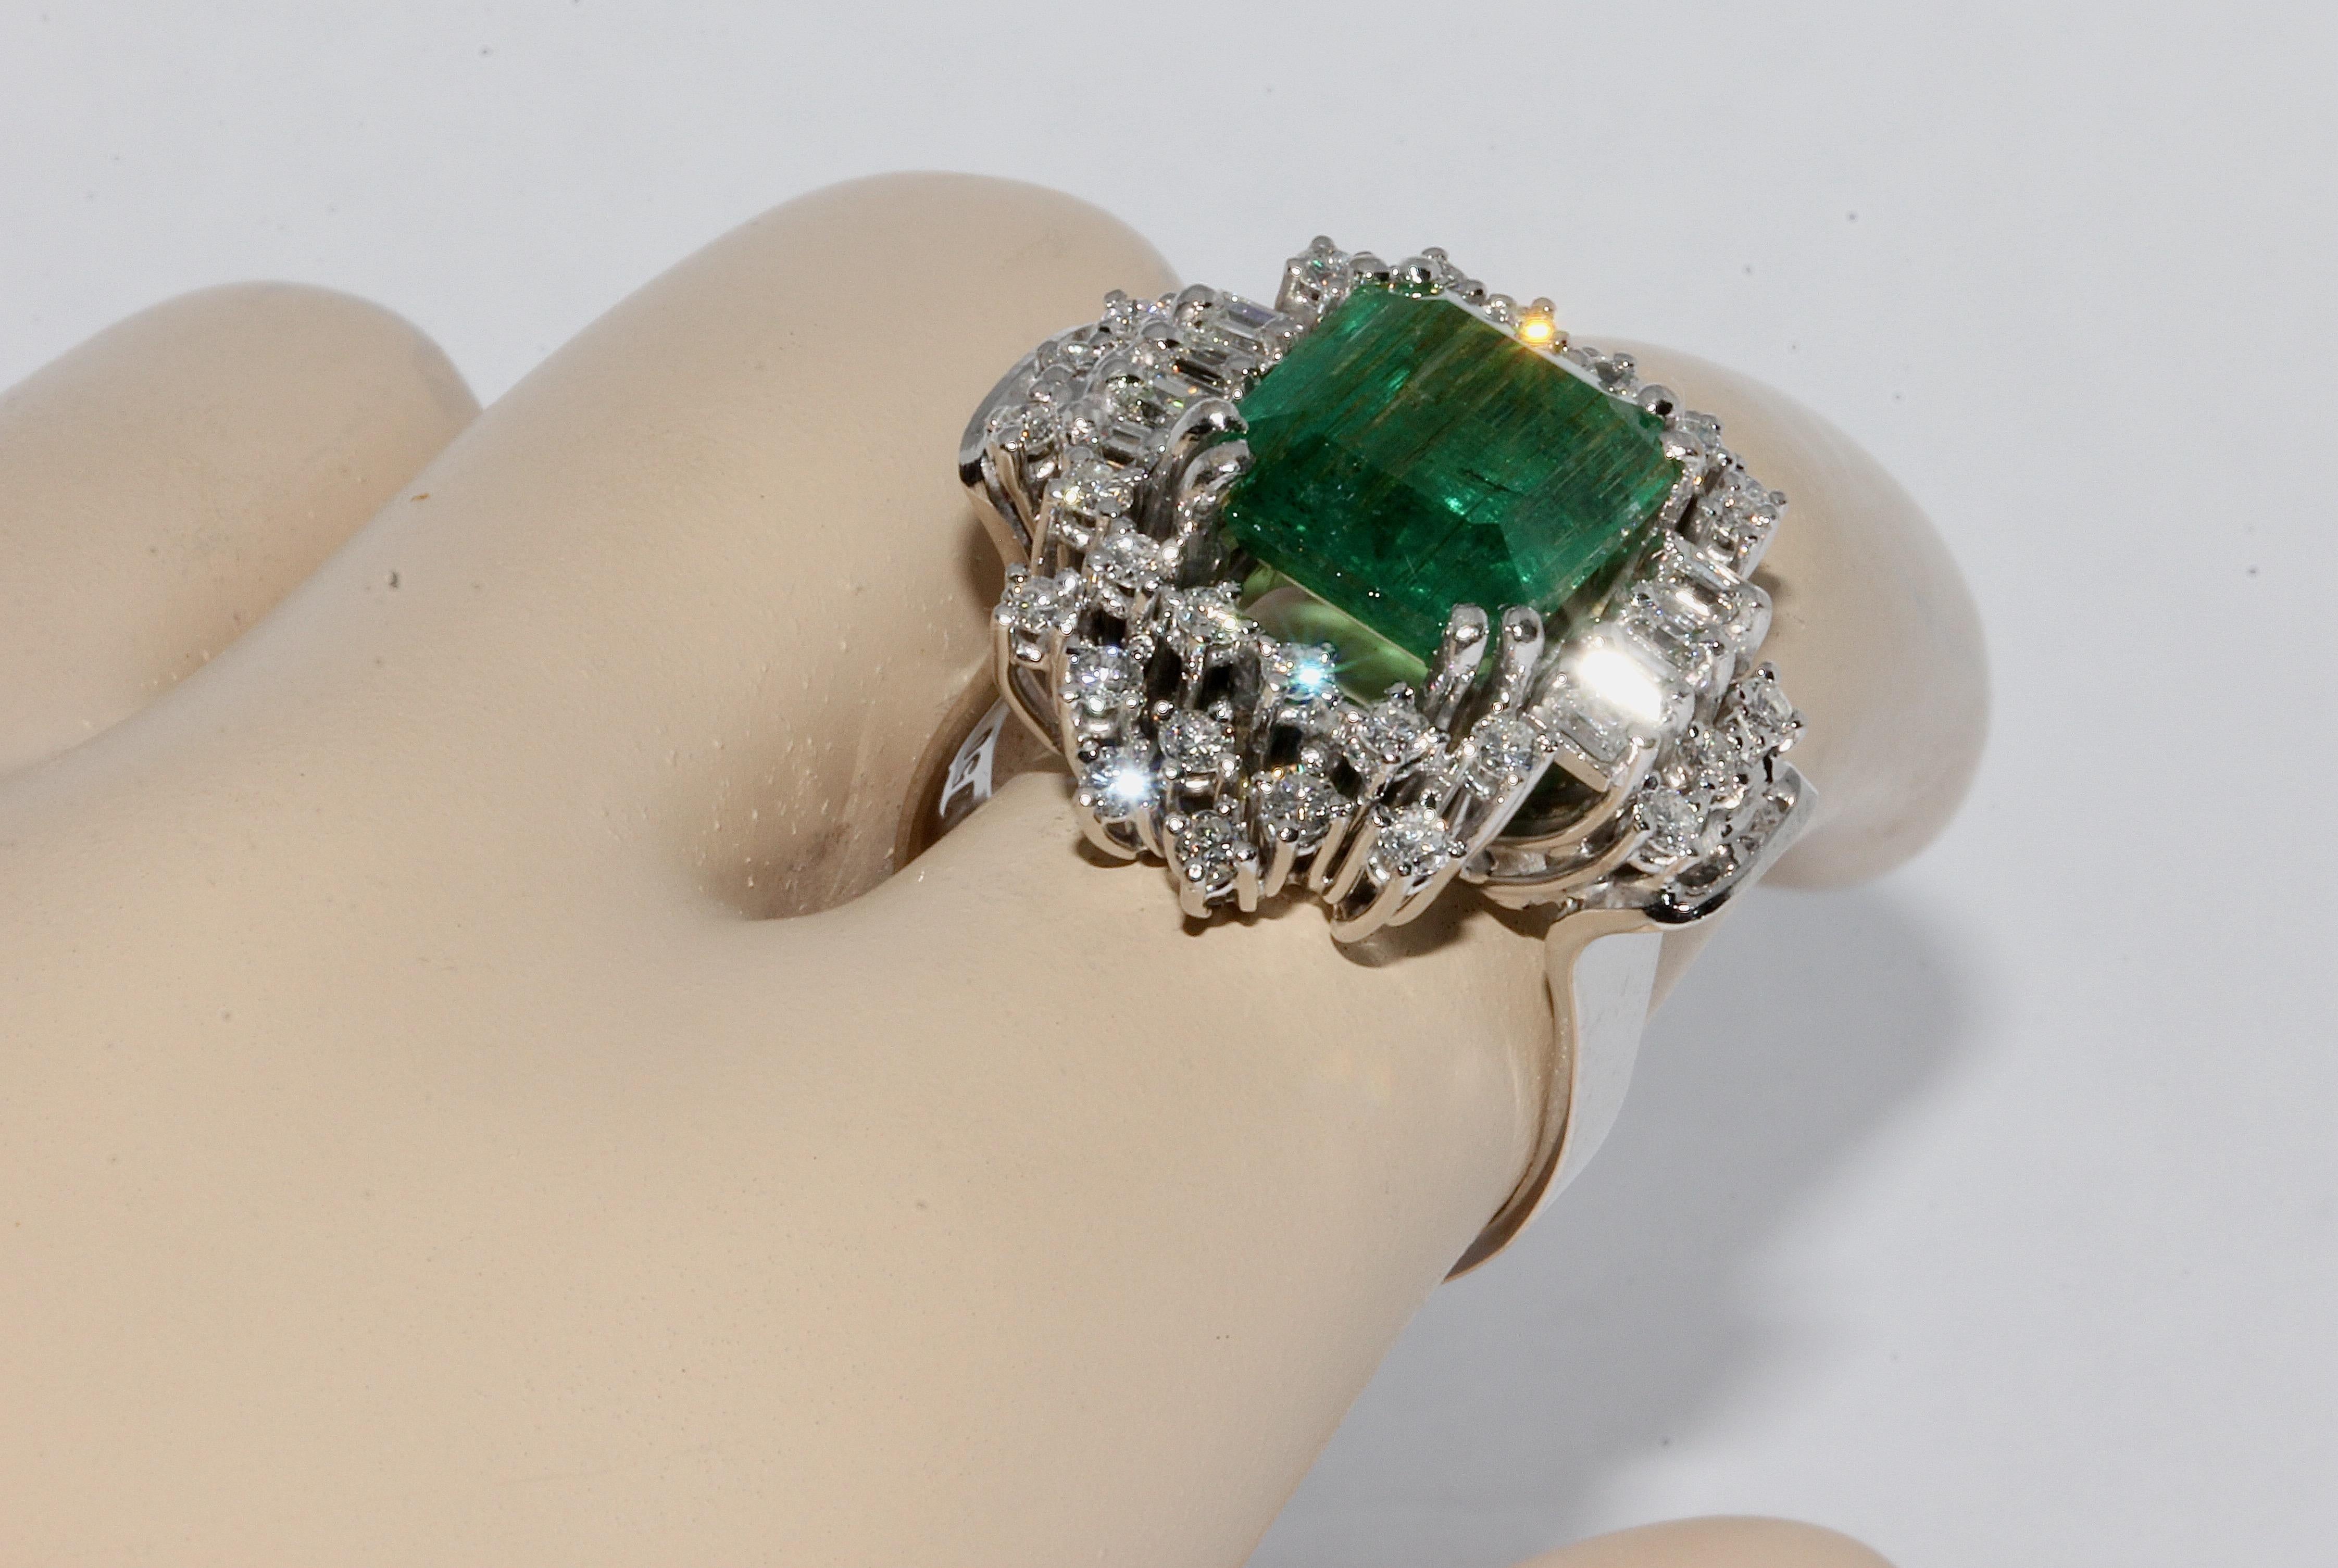 18 Karat White Gold Ring Set with White Diamonds and Large 4.5 Carat Emerald For Sale 2